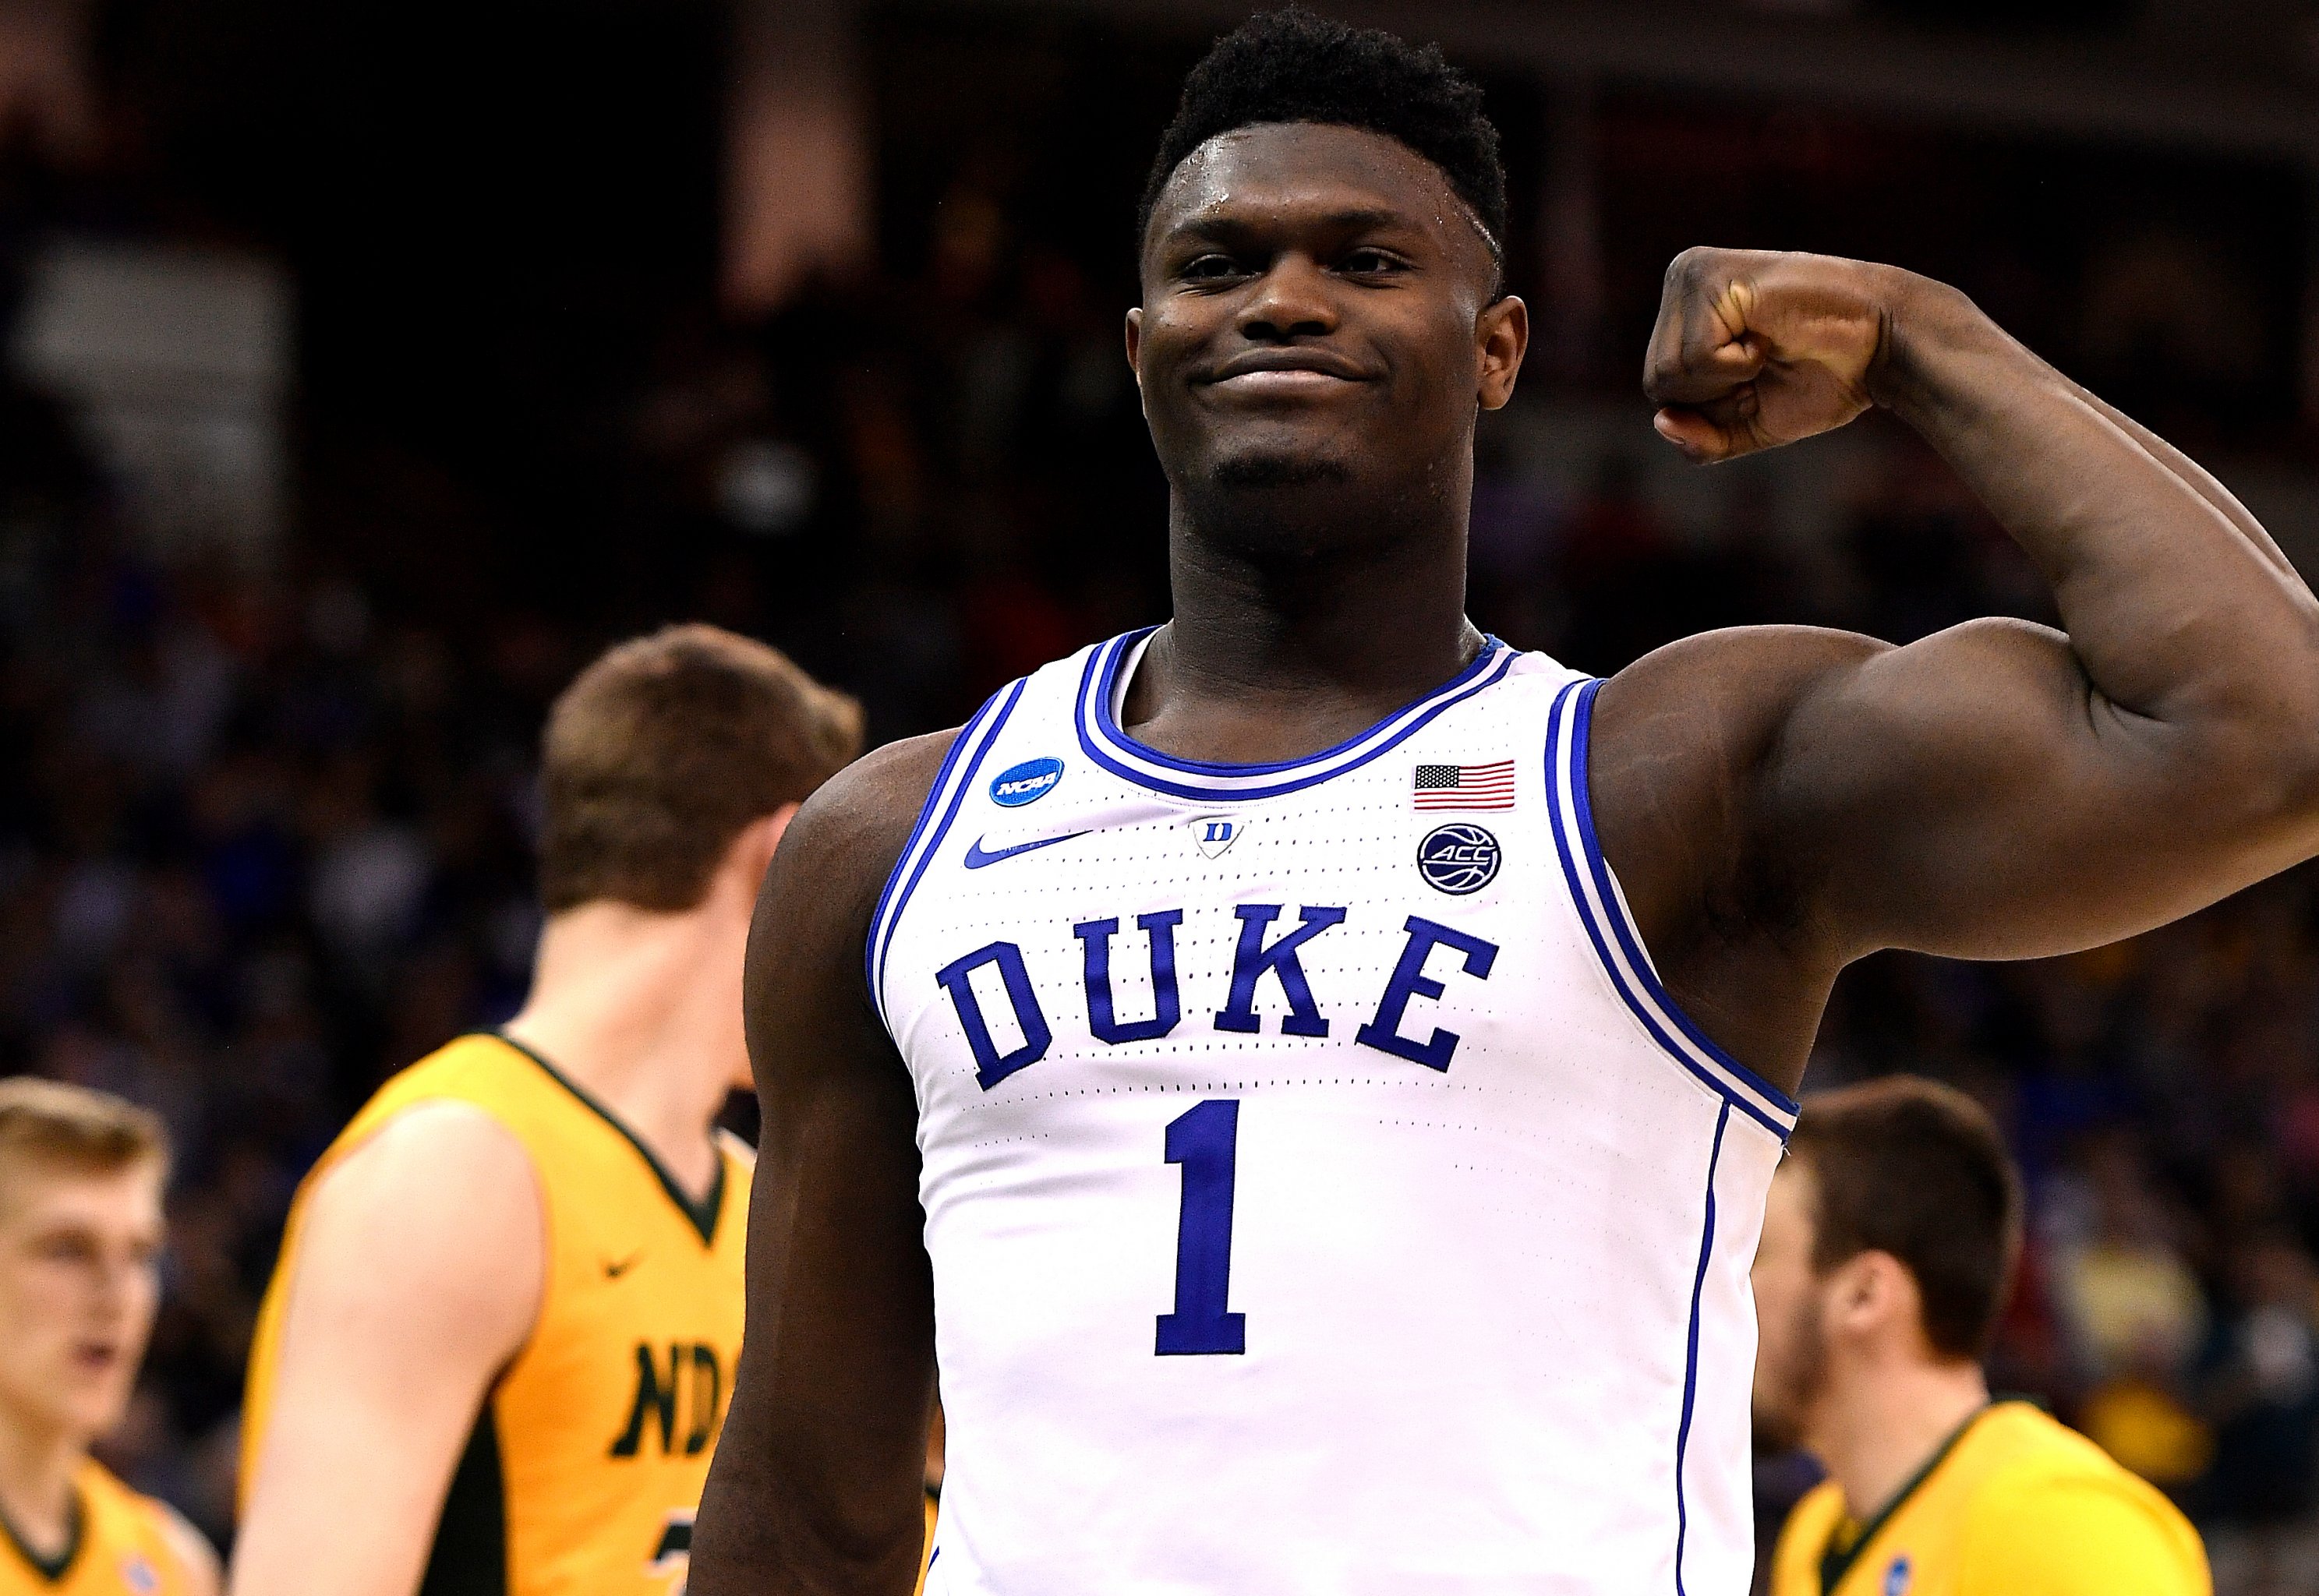 Ncaa Men S Tournament 2019 Ranking The Top Performers Through The 1st Round Bleacher Report Latest News Videos And Highlights